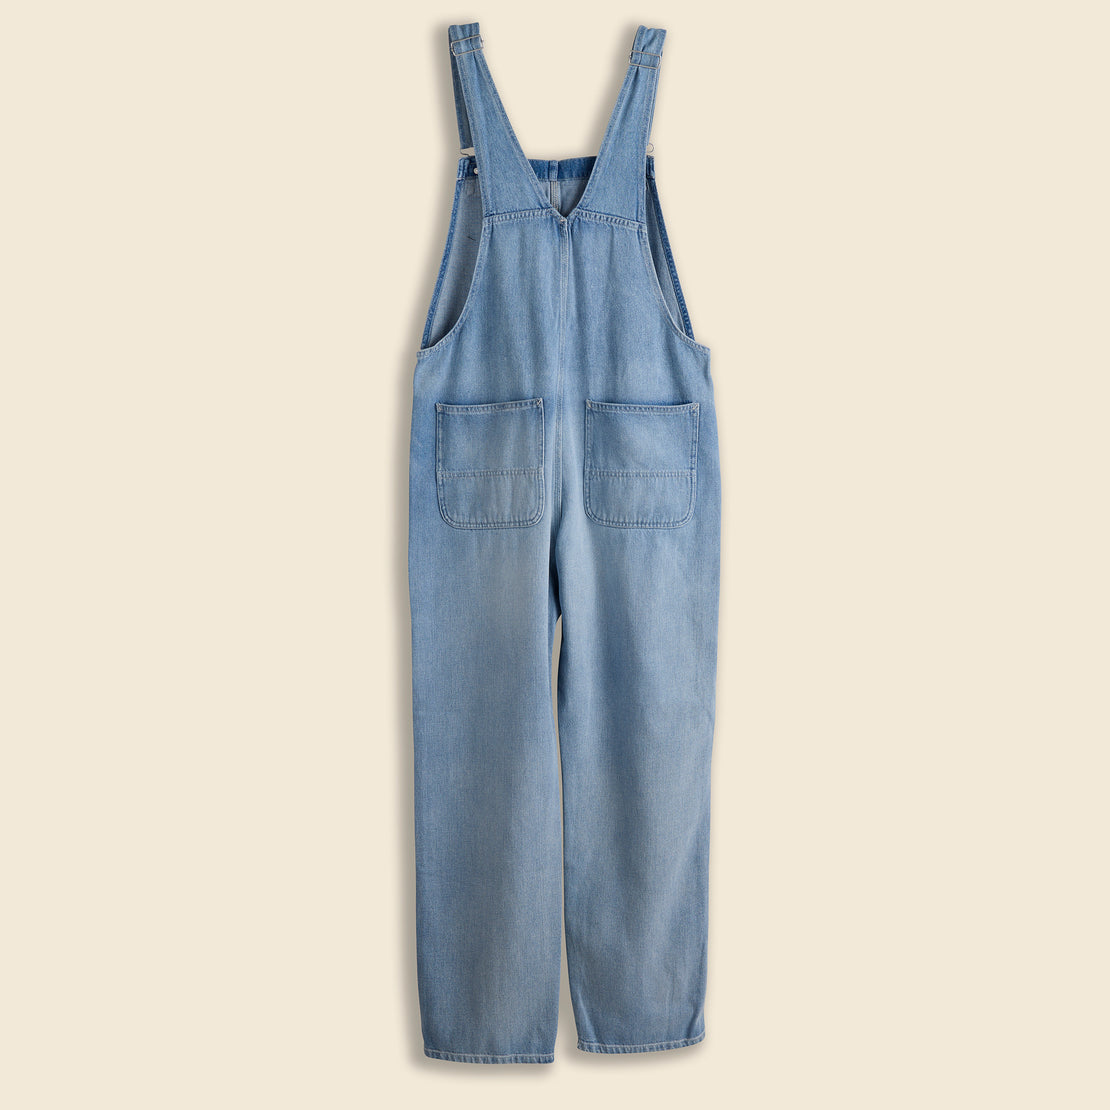 Bib Overall Straight - Blue Light Stone Wash - Carhartt WIP - STAG Provisions - W - Onepiece - Overalls